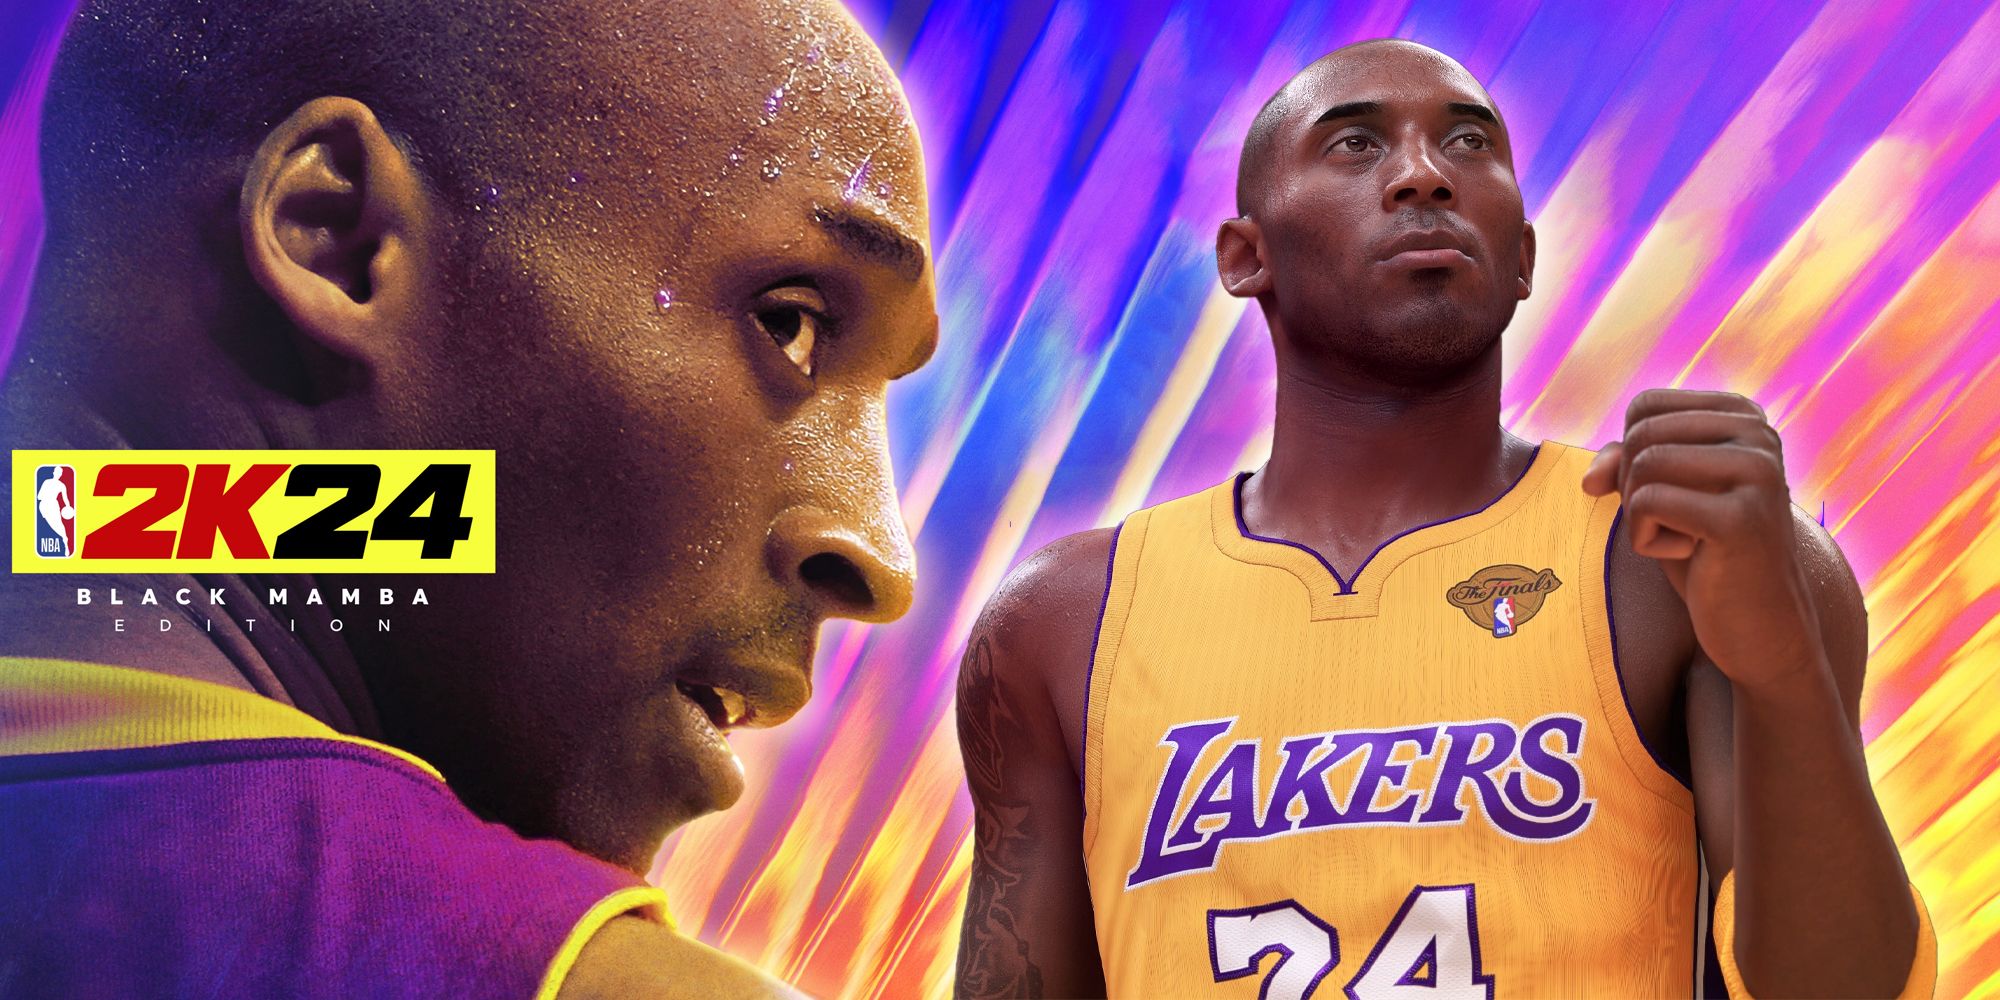 A composite of two images of Kobe Bryant; at left, the closeup of him as he appears on the cover of NBA 2K24. At right, a screenshot of him in-game with a clenched fist held up near his chest.